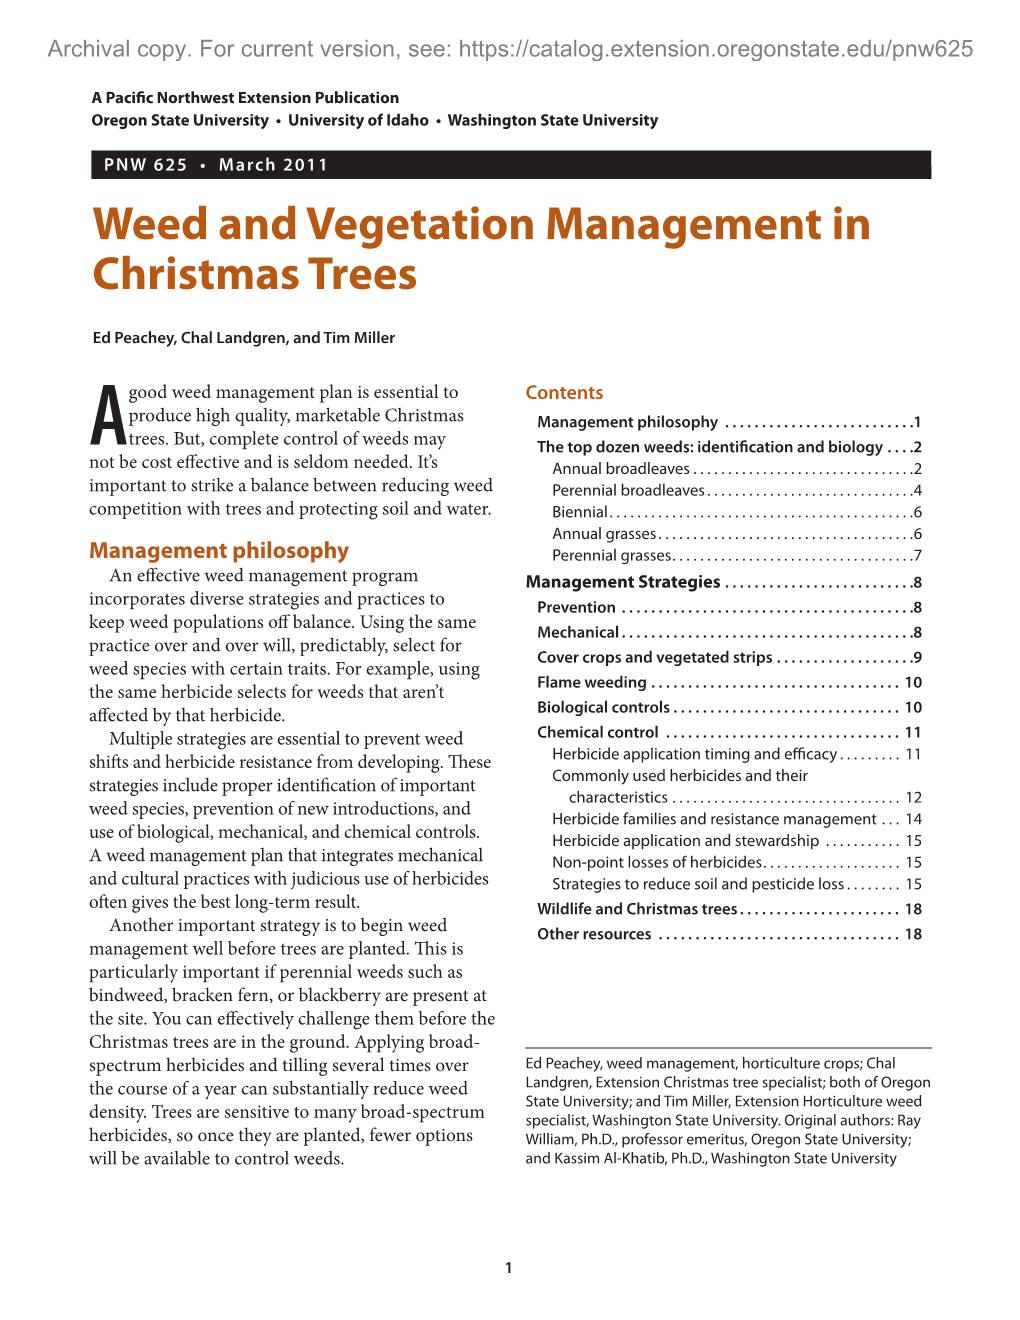 Weed and Vegetation Management in Christmas Trees